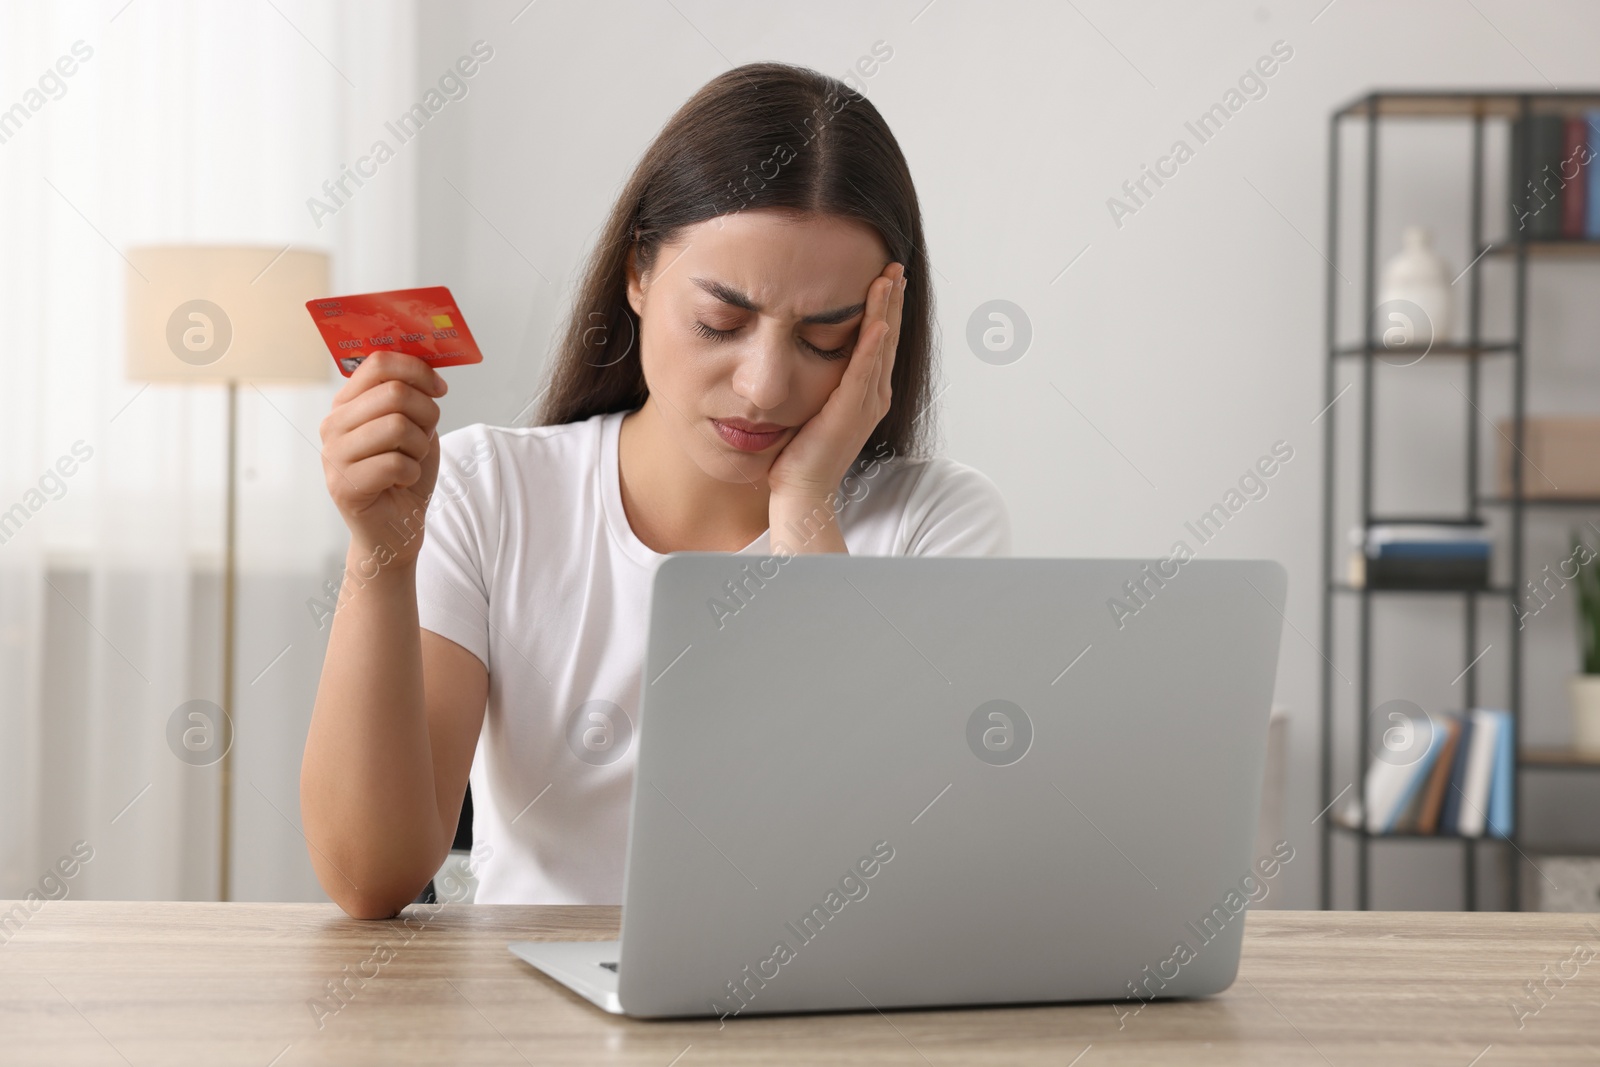 Photo of Stressed woman with credit card and laptop at table indoors. Be careful - fraud